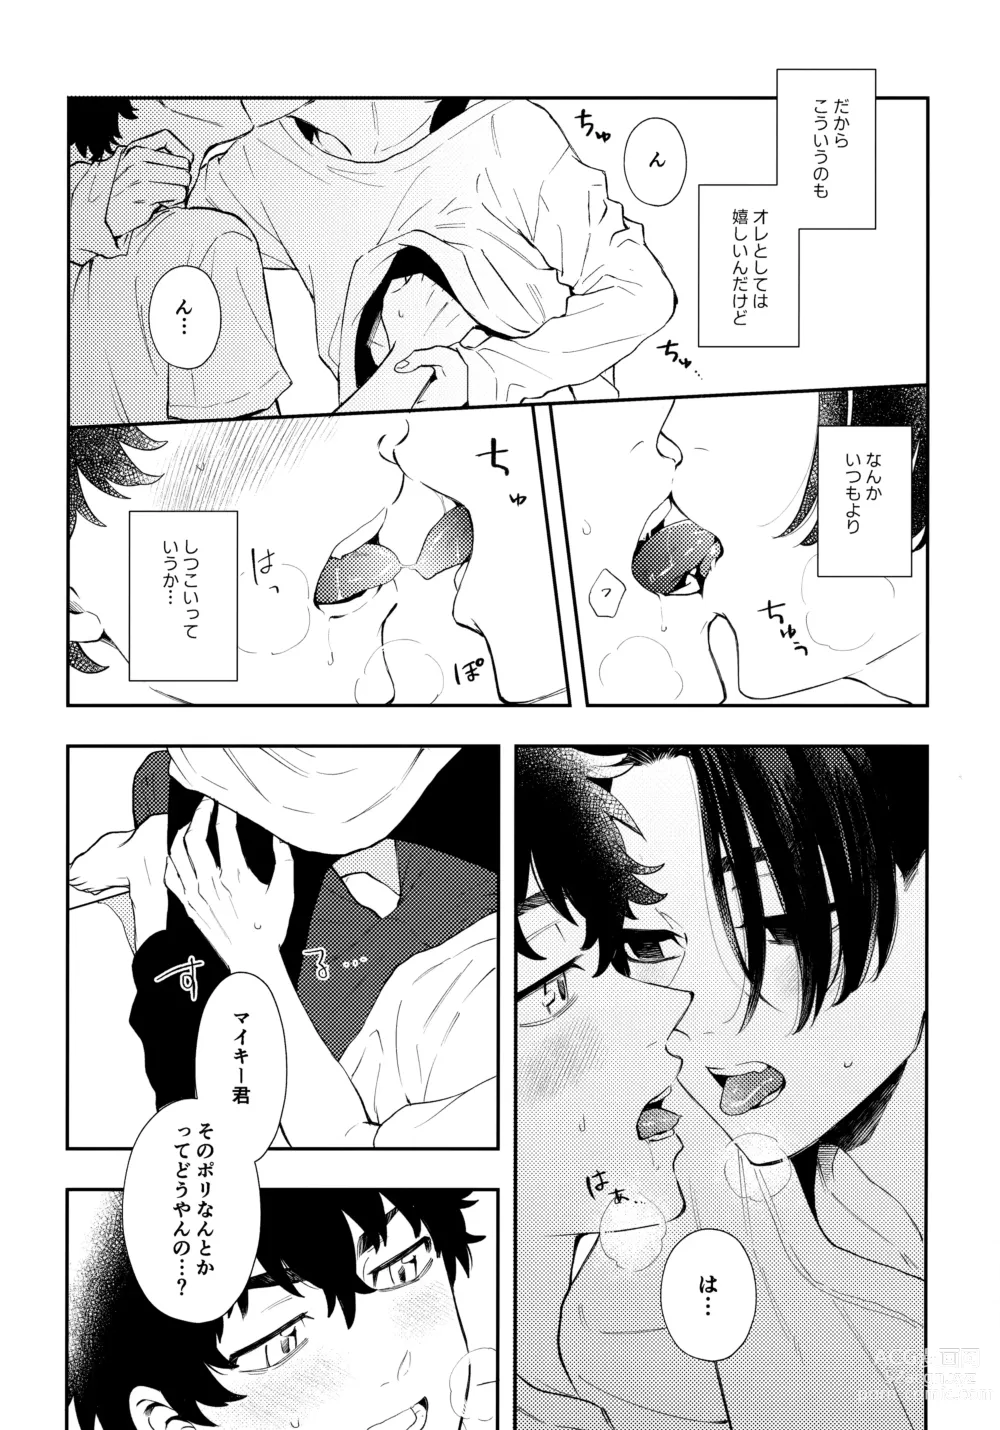 Page 5 of doujinshi Count 5